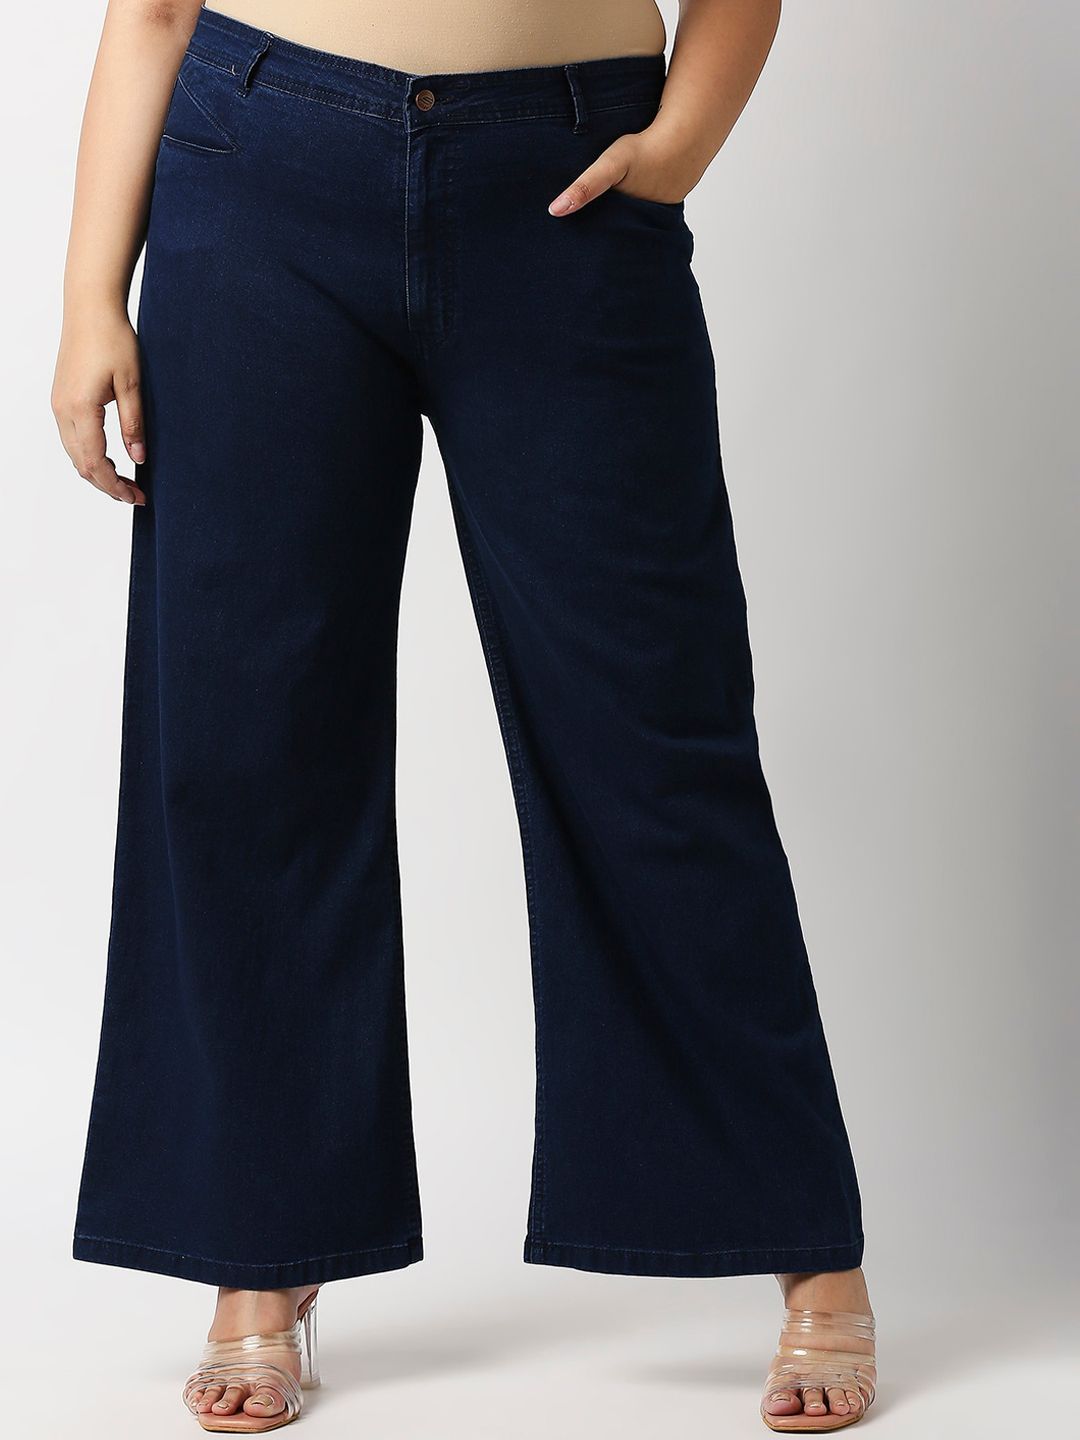 High Star Women Plus Size Navy Blue Wide Leg High-Rise Stretchable Jeans Price in India